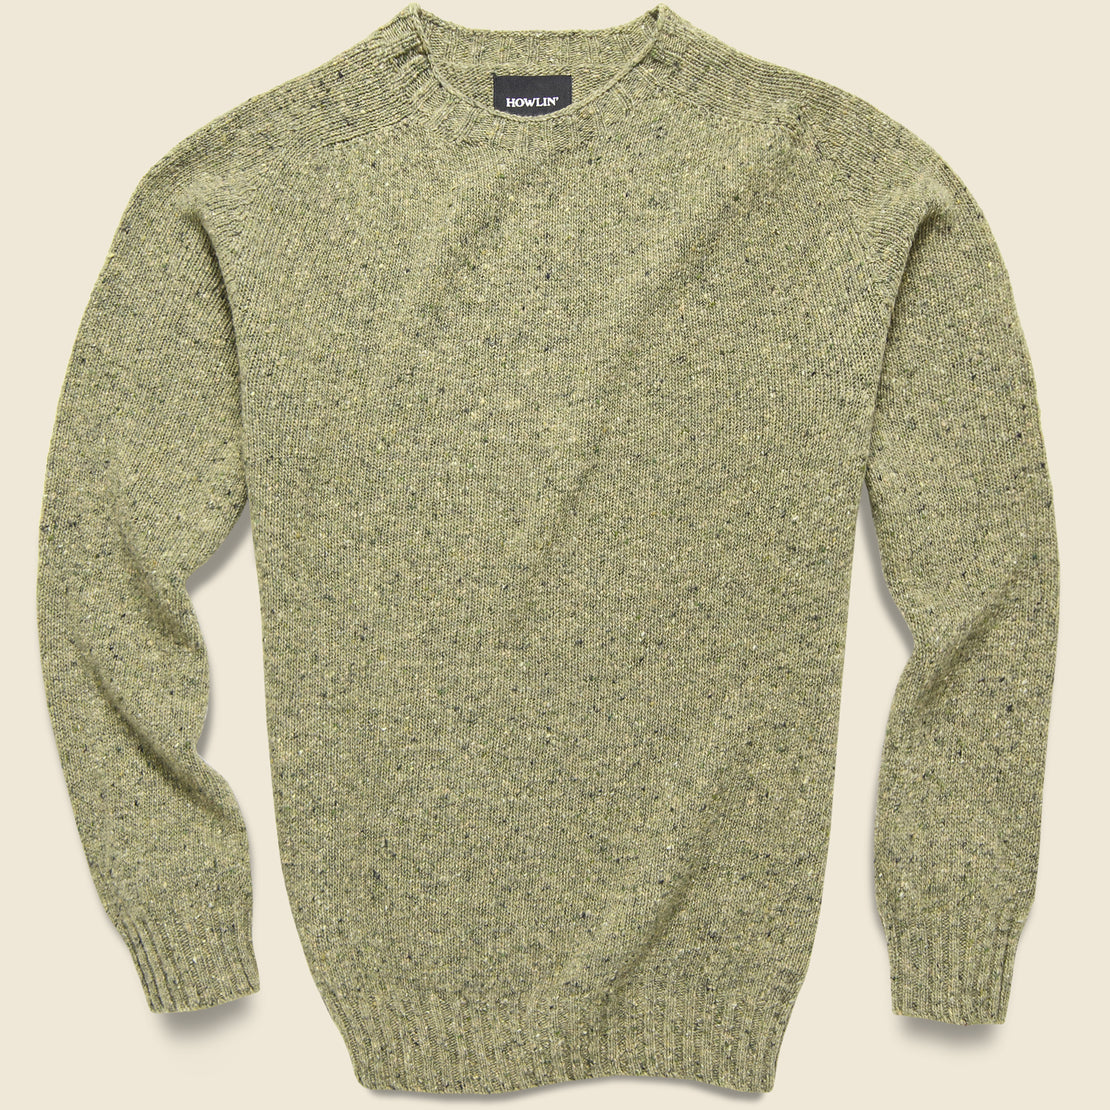 Howlin Terry Donegal Crew Sweater - Swamp